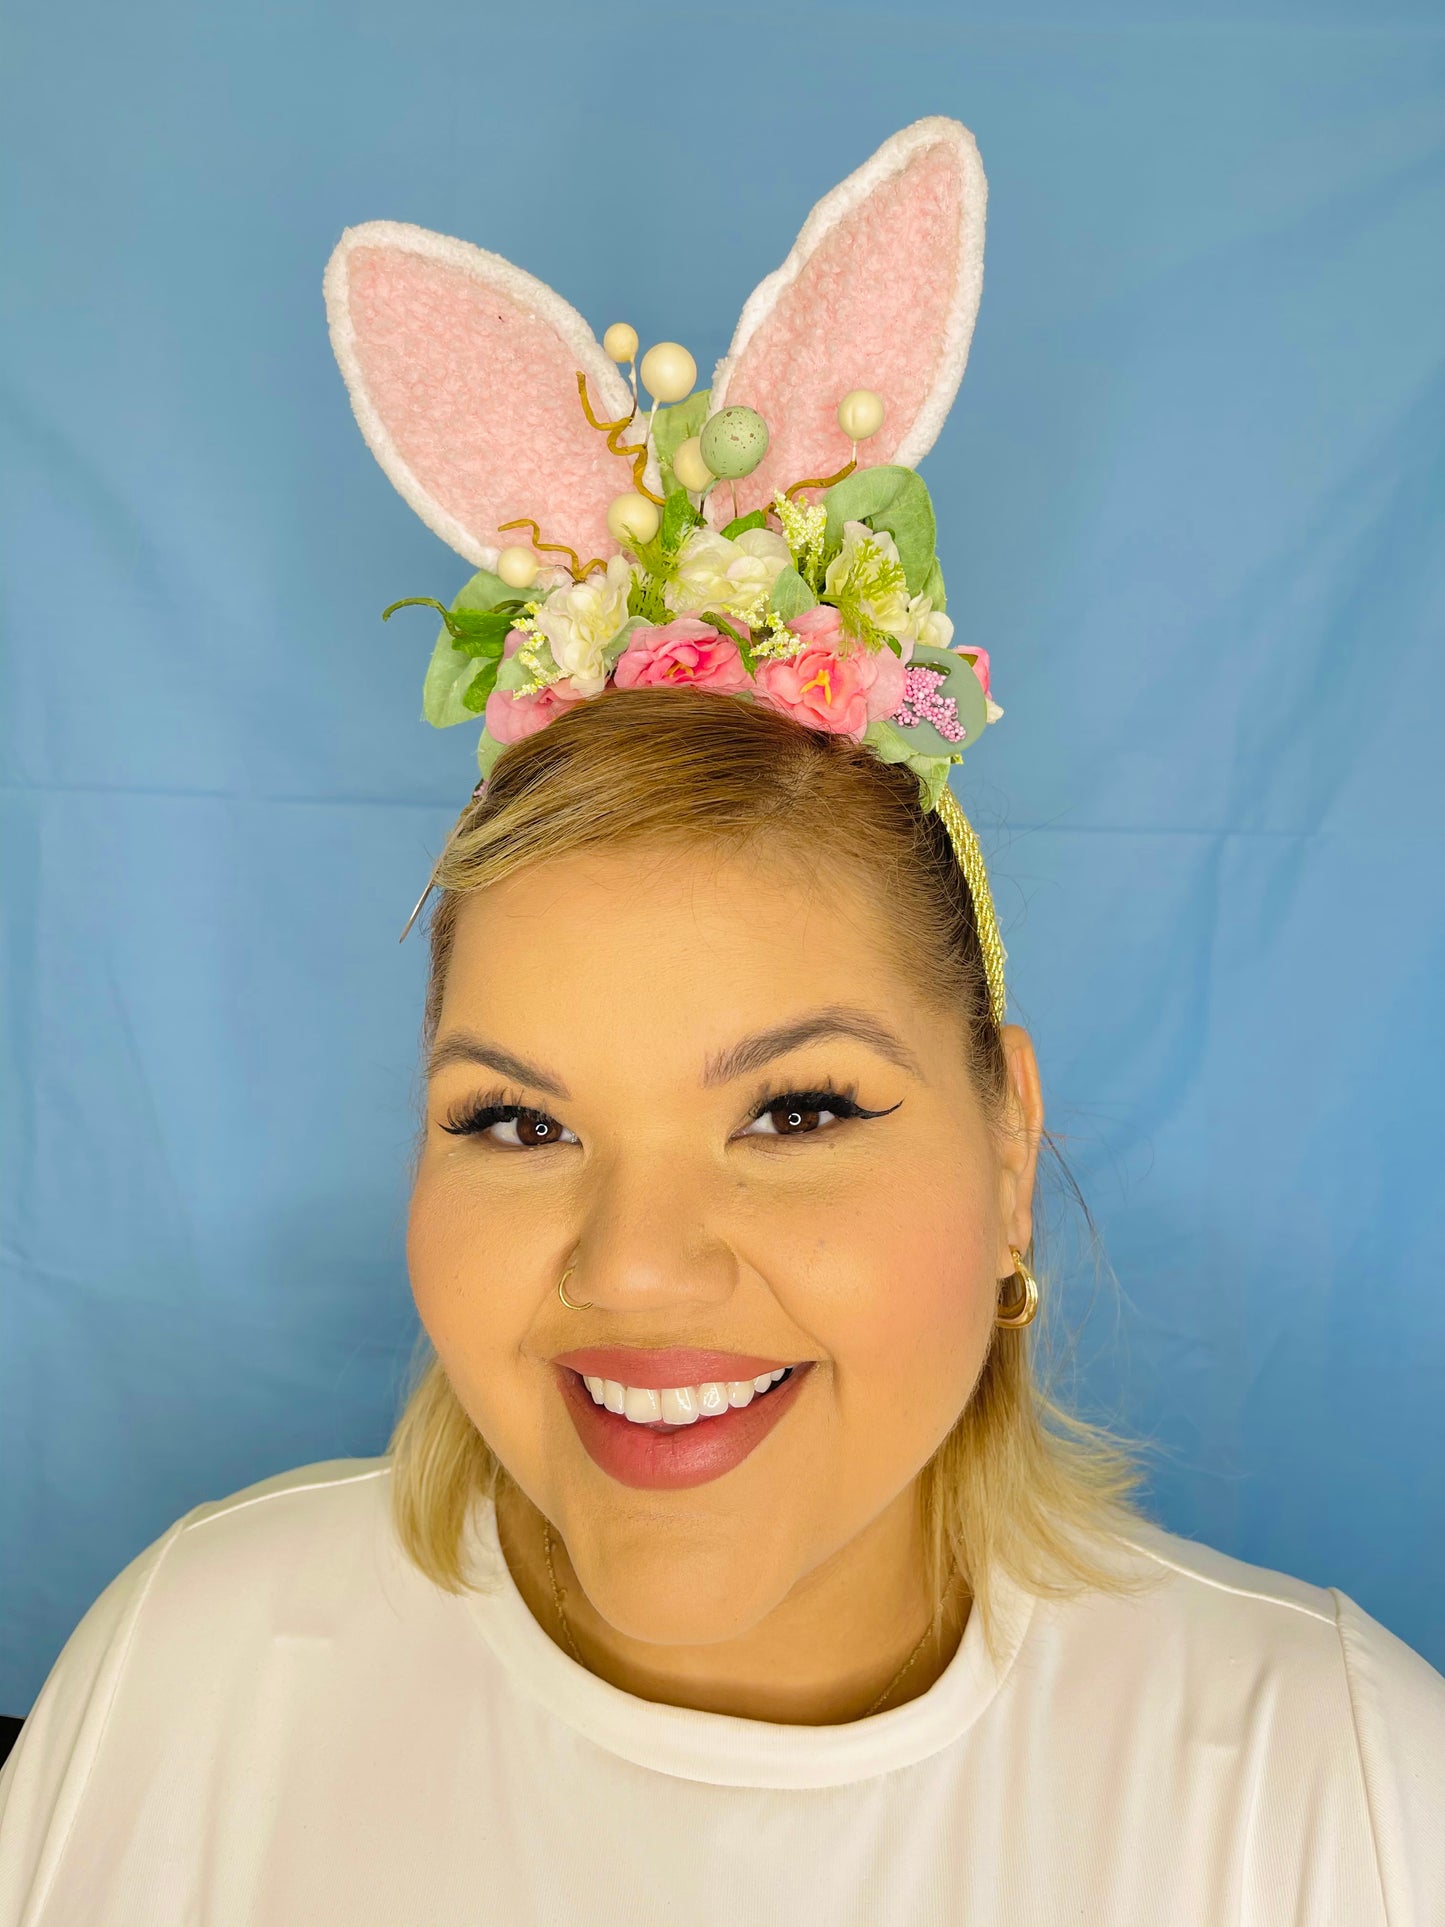 Mini-Flower Crown with Bunny Ears